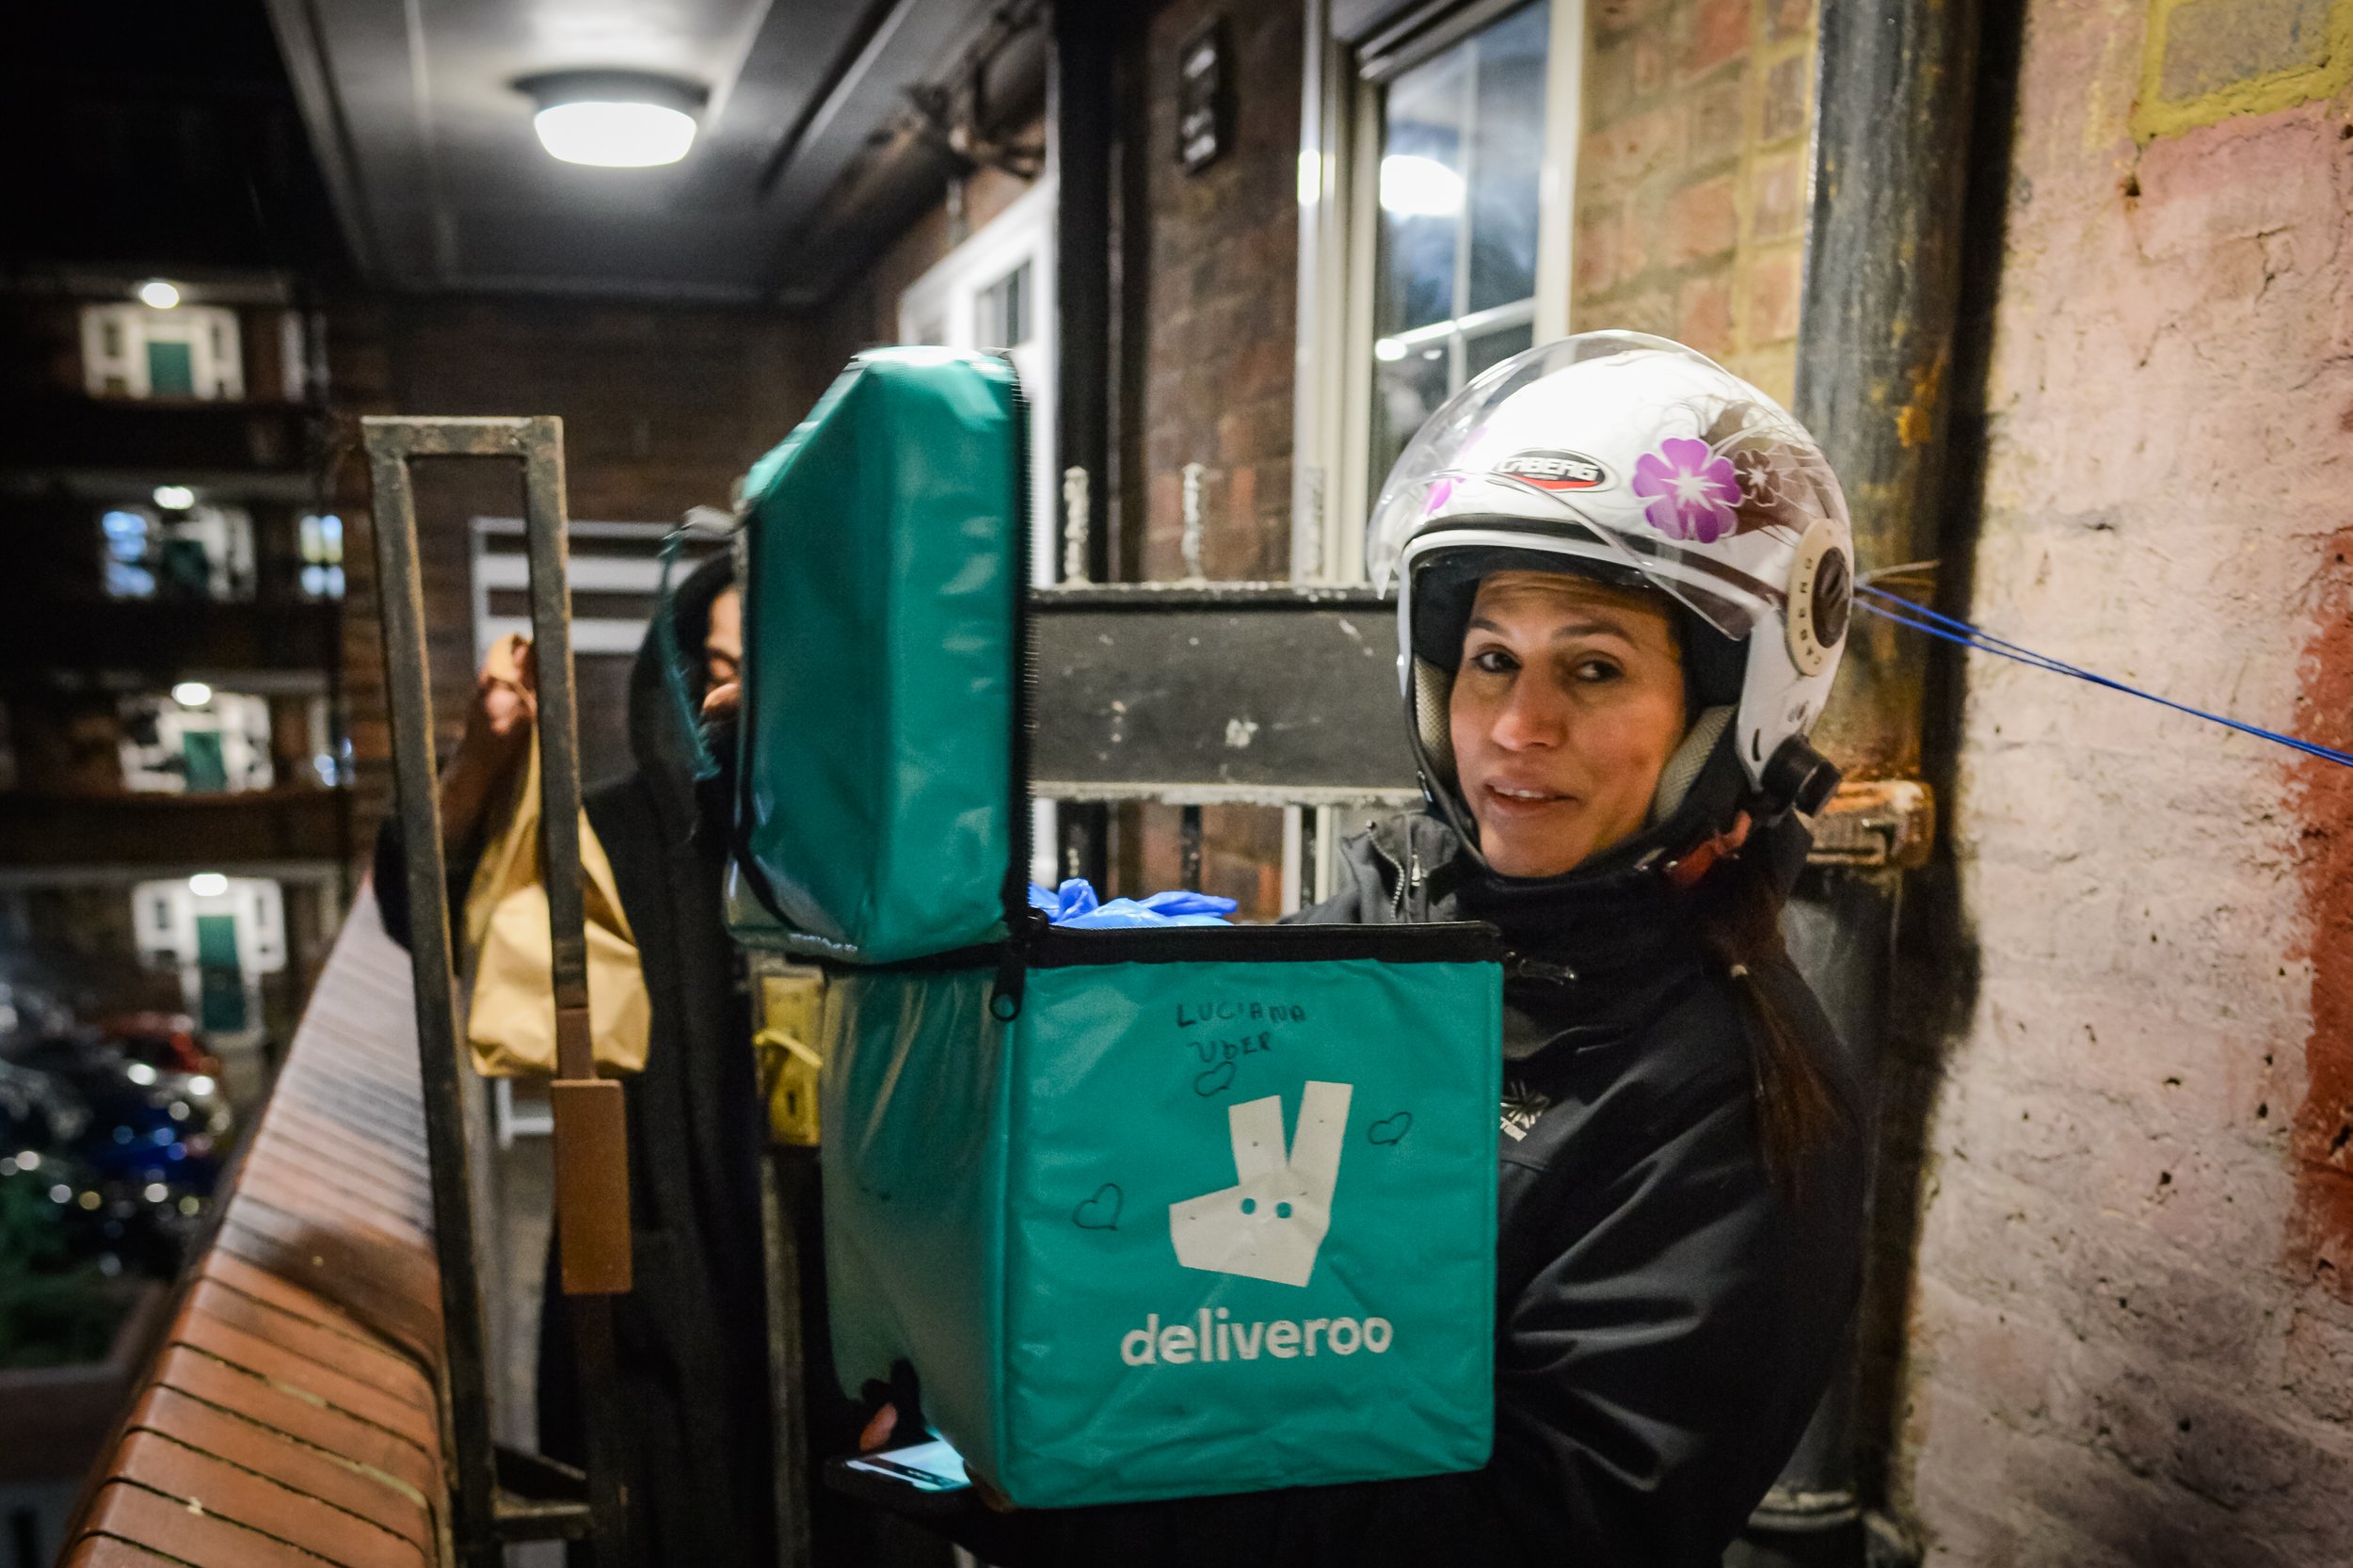  Luciana, riding for 2 years, drops off a delivery to a man in a local flat 